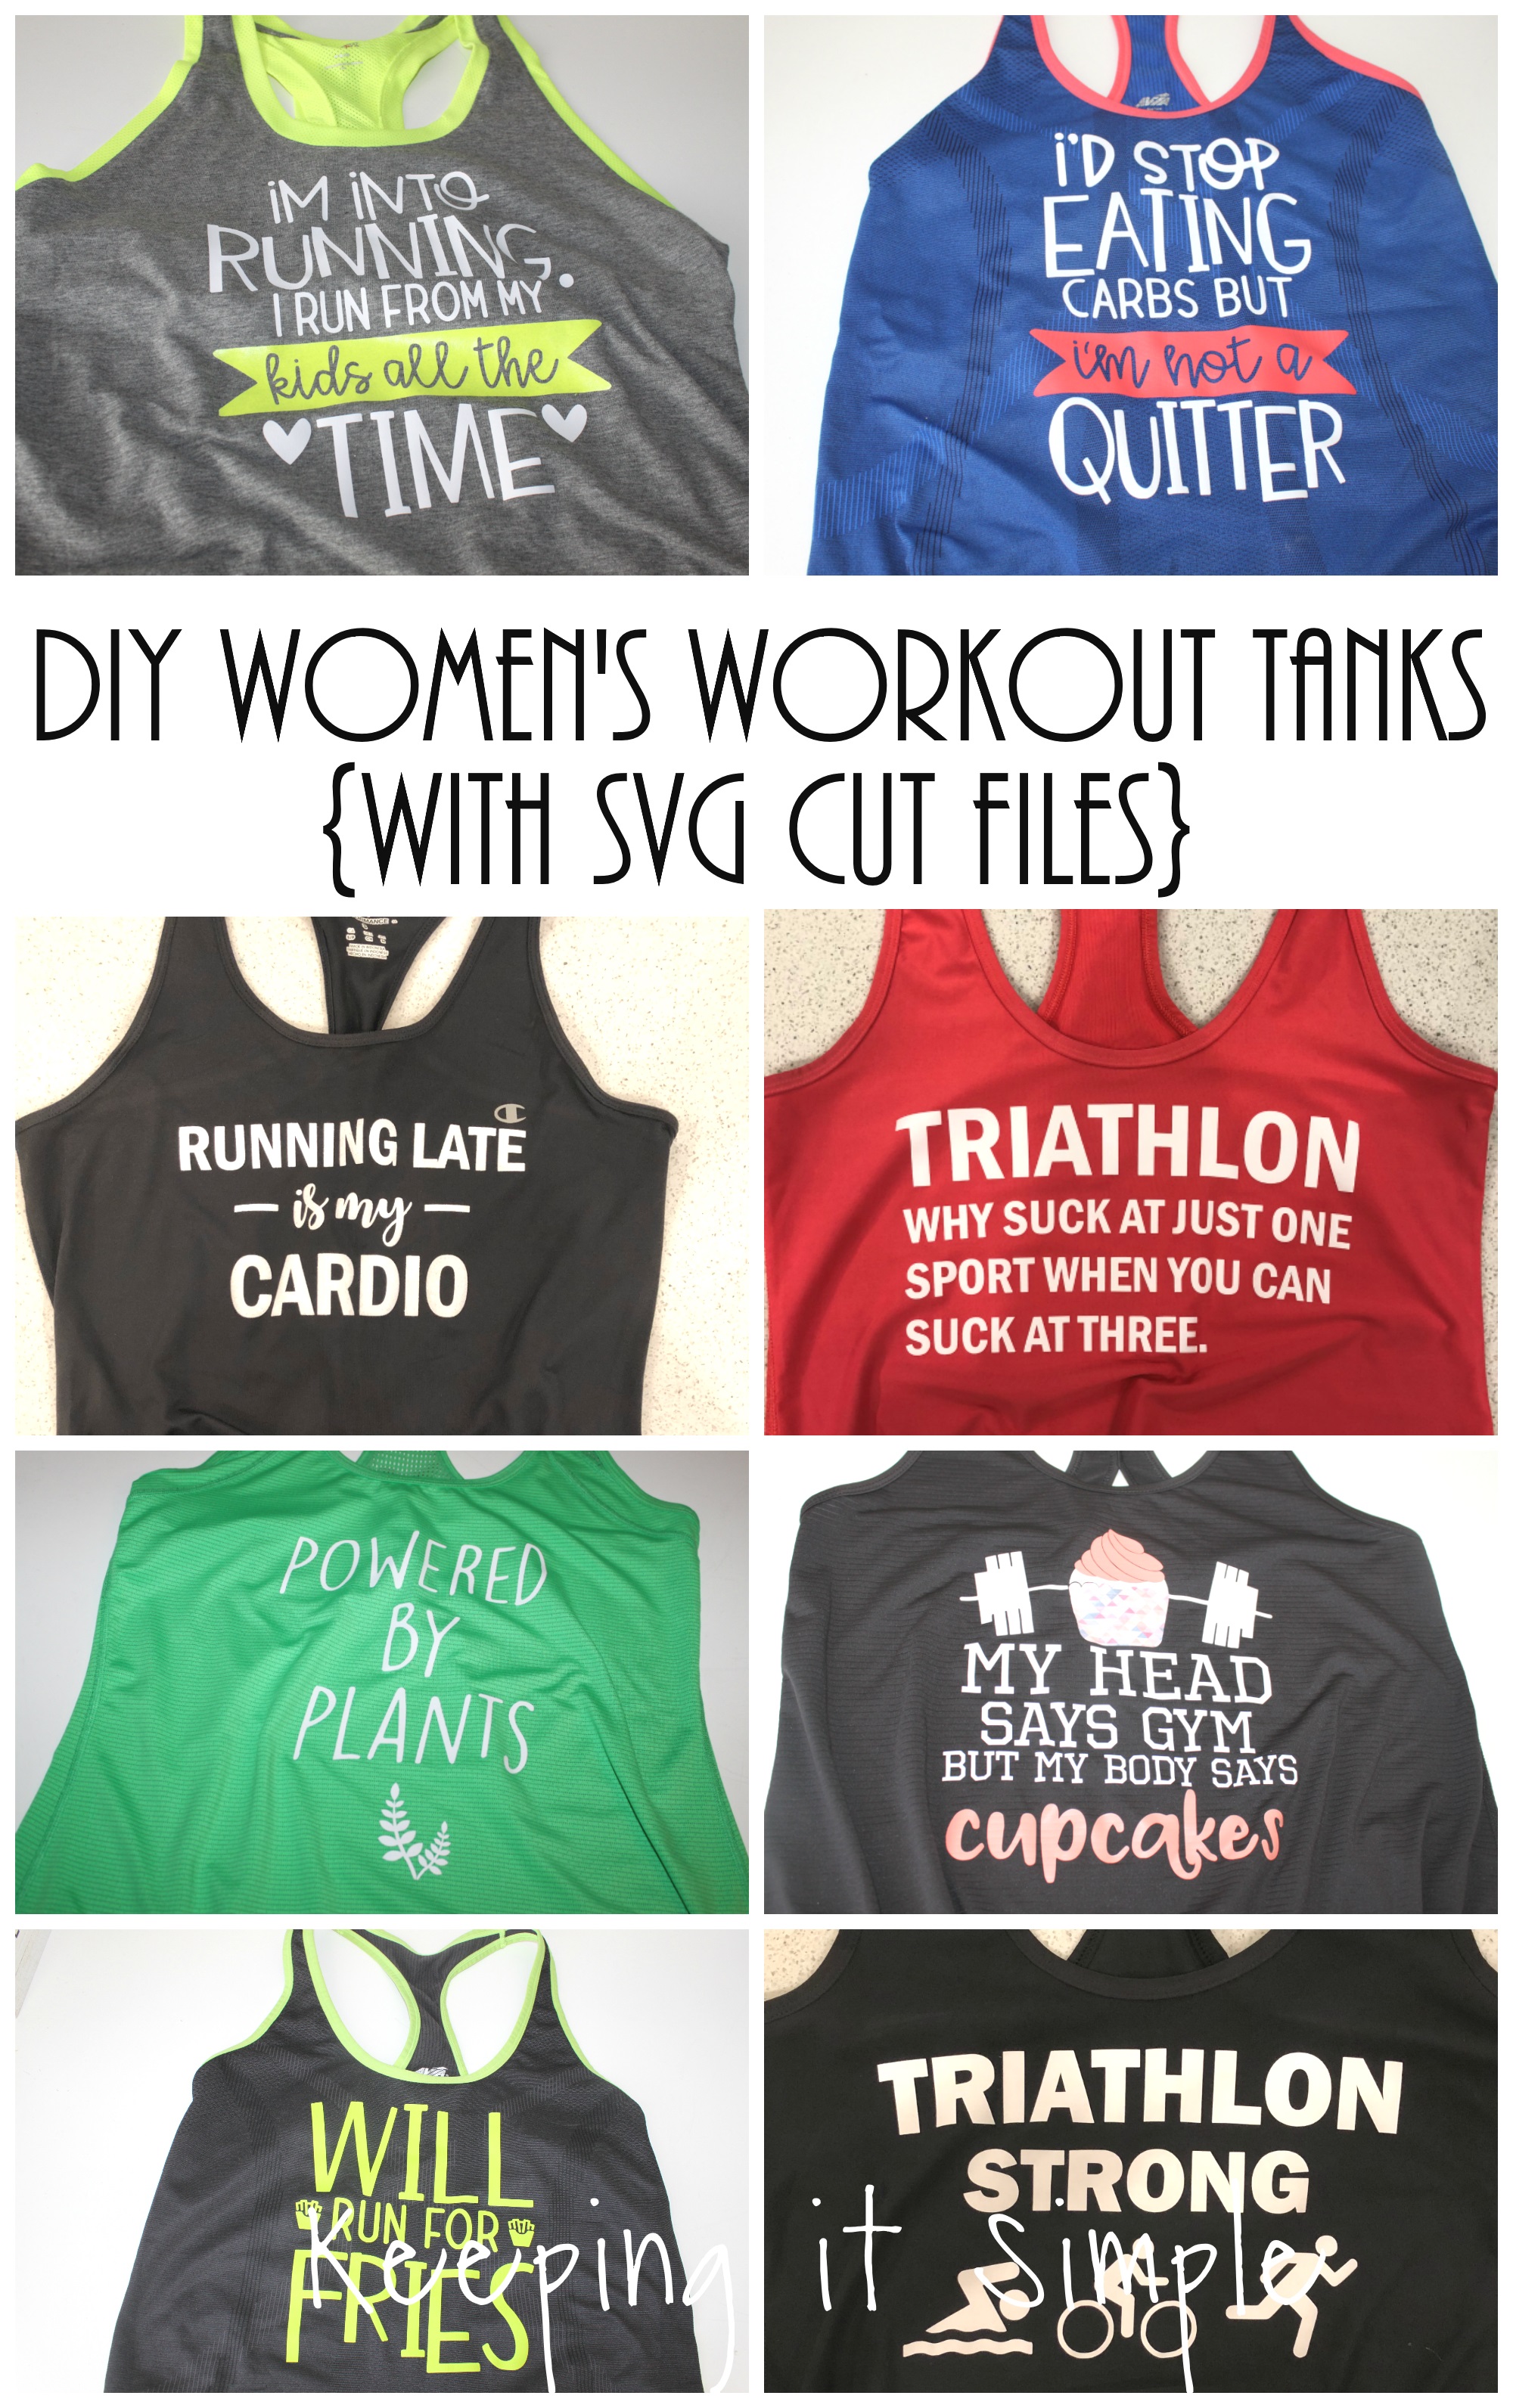 DIY Women's Workout Tanks with SVG Cut Files - Keeping it Simple